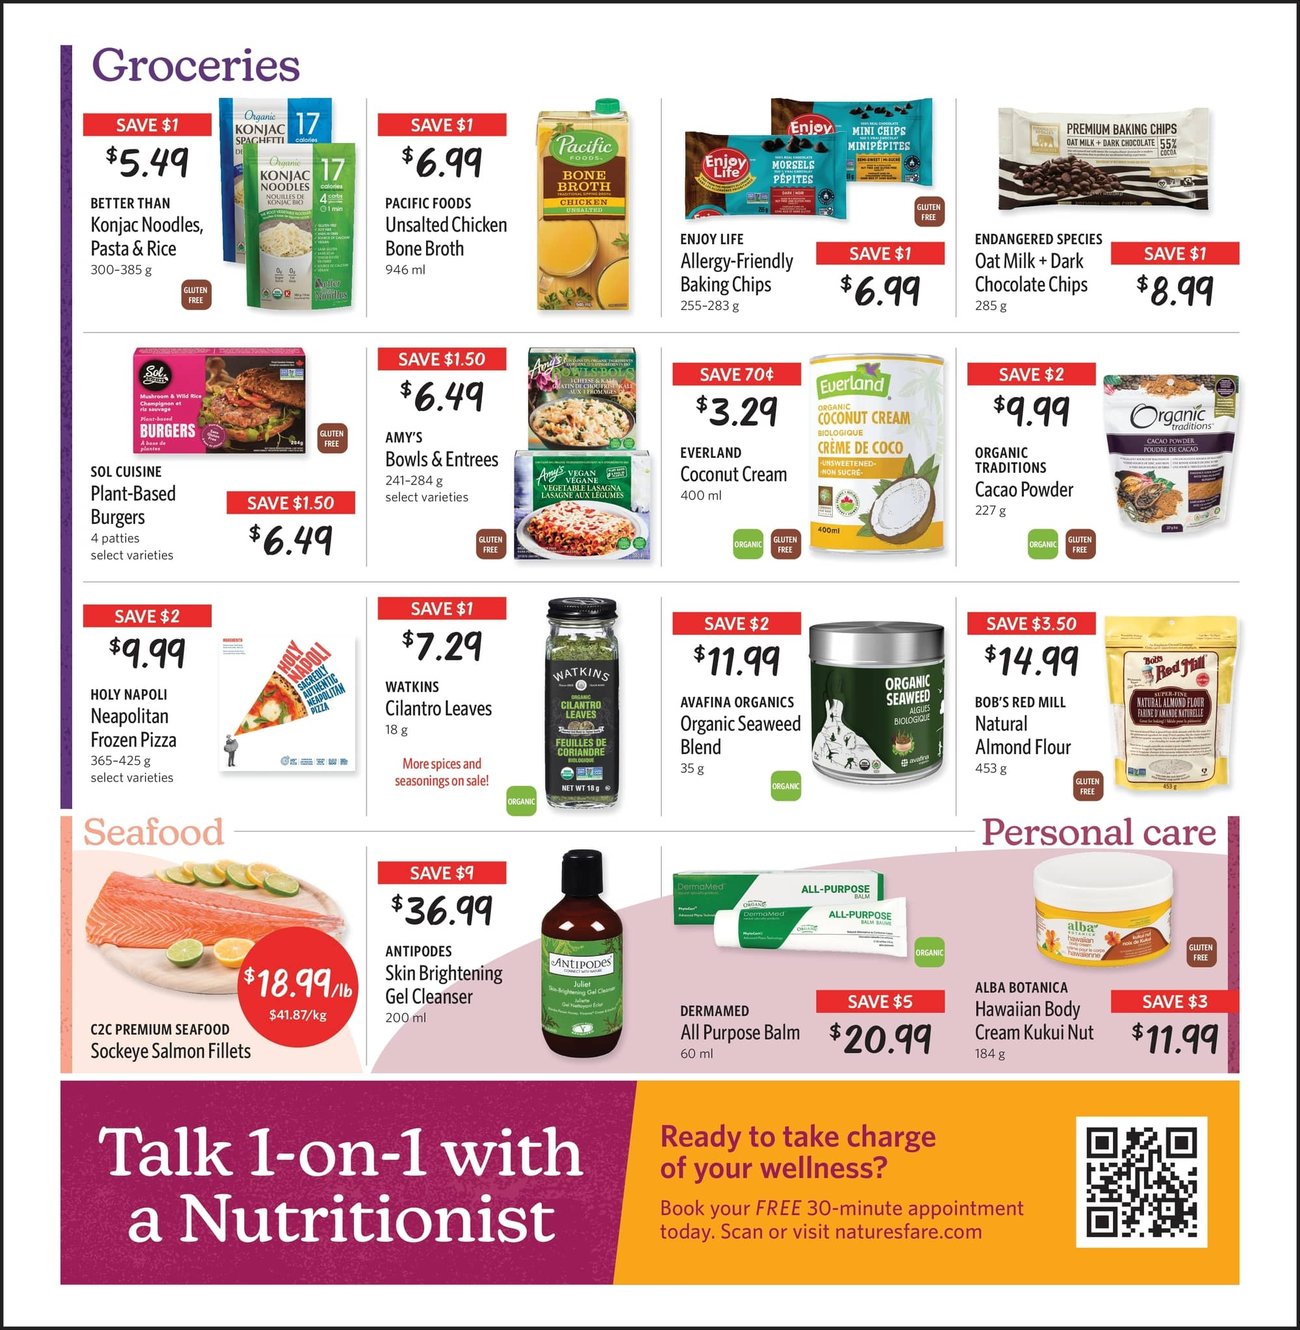 Nature's Fare Markets - 2 Weeks of Savings - Page 4